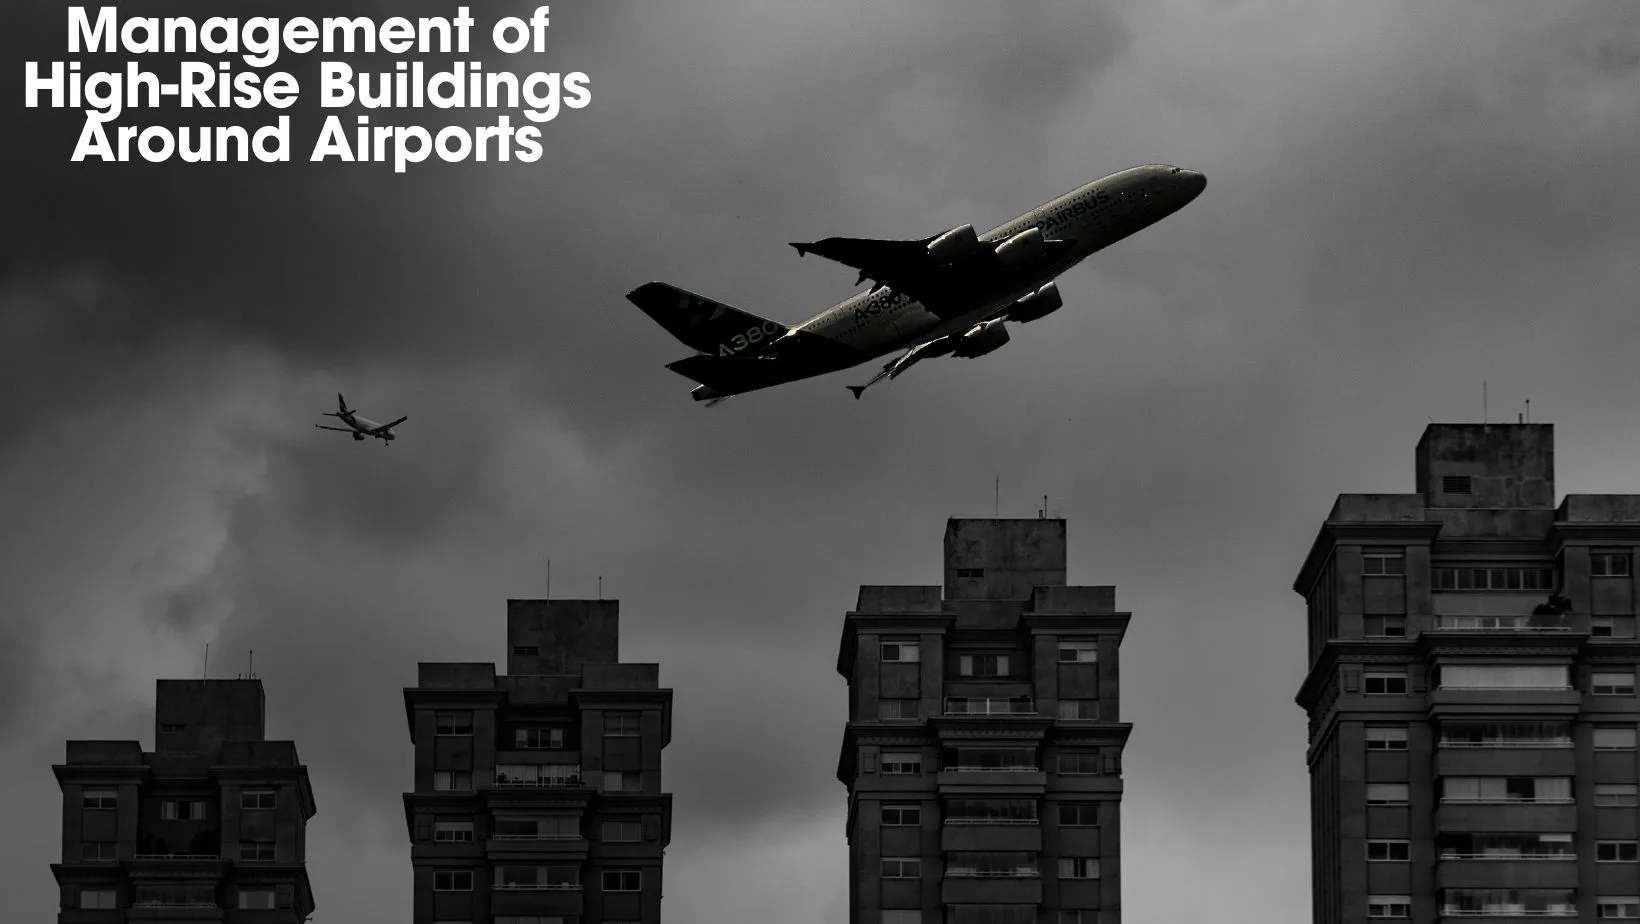 Management of High-Rise Buildings Around Airports